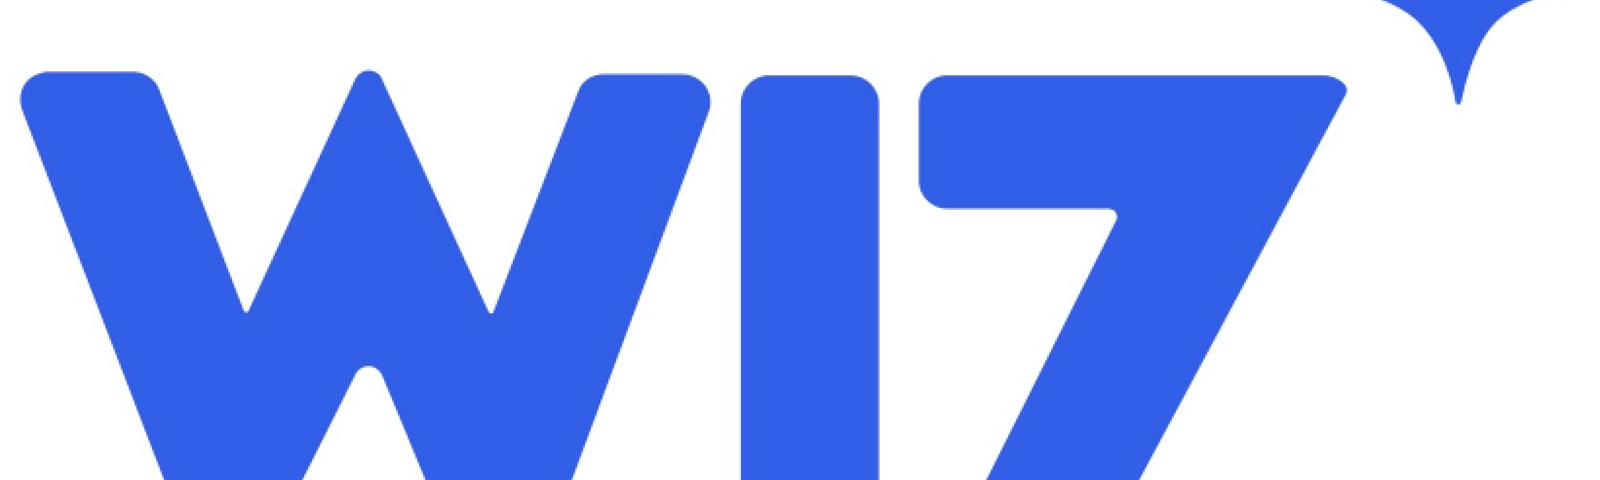 IMAGE: Wiz logo reimagined as a hypothetical Google company